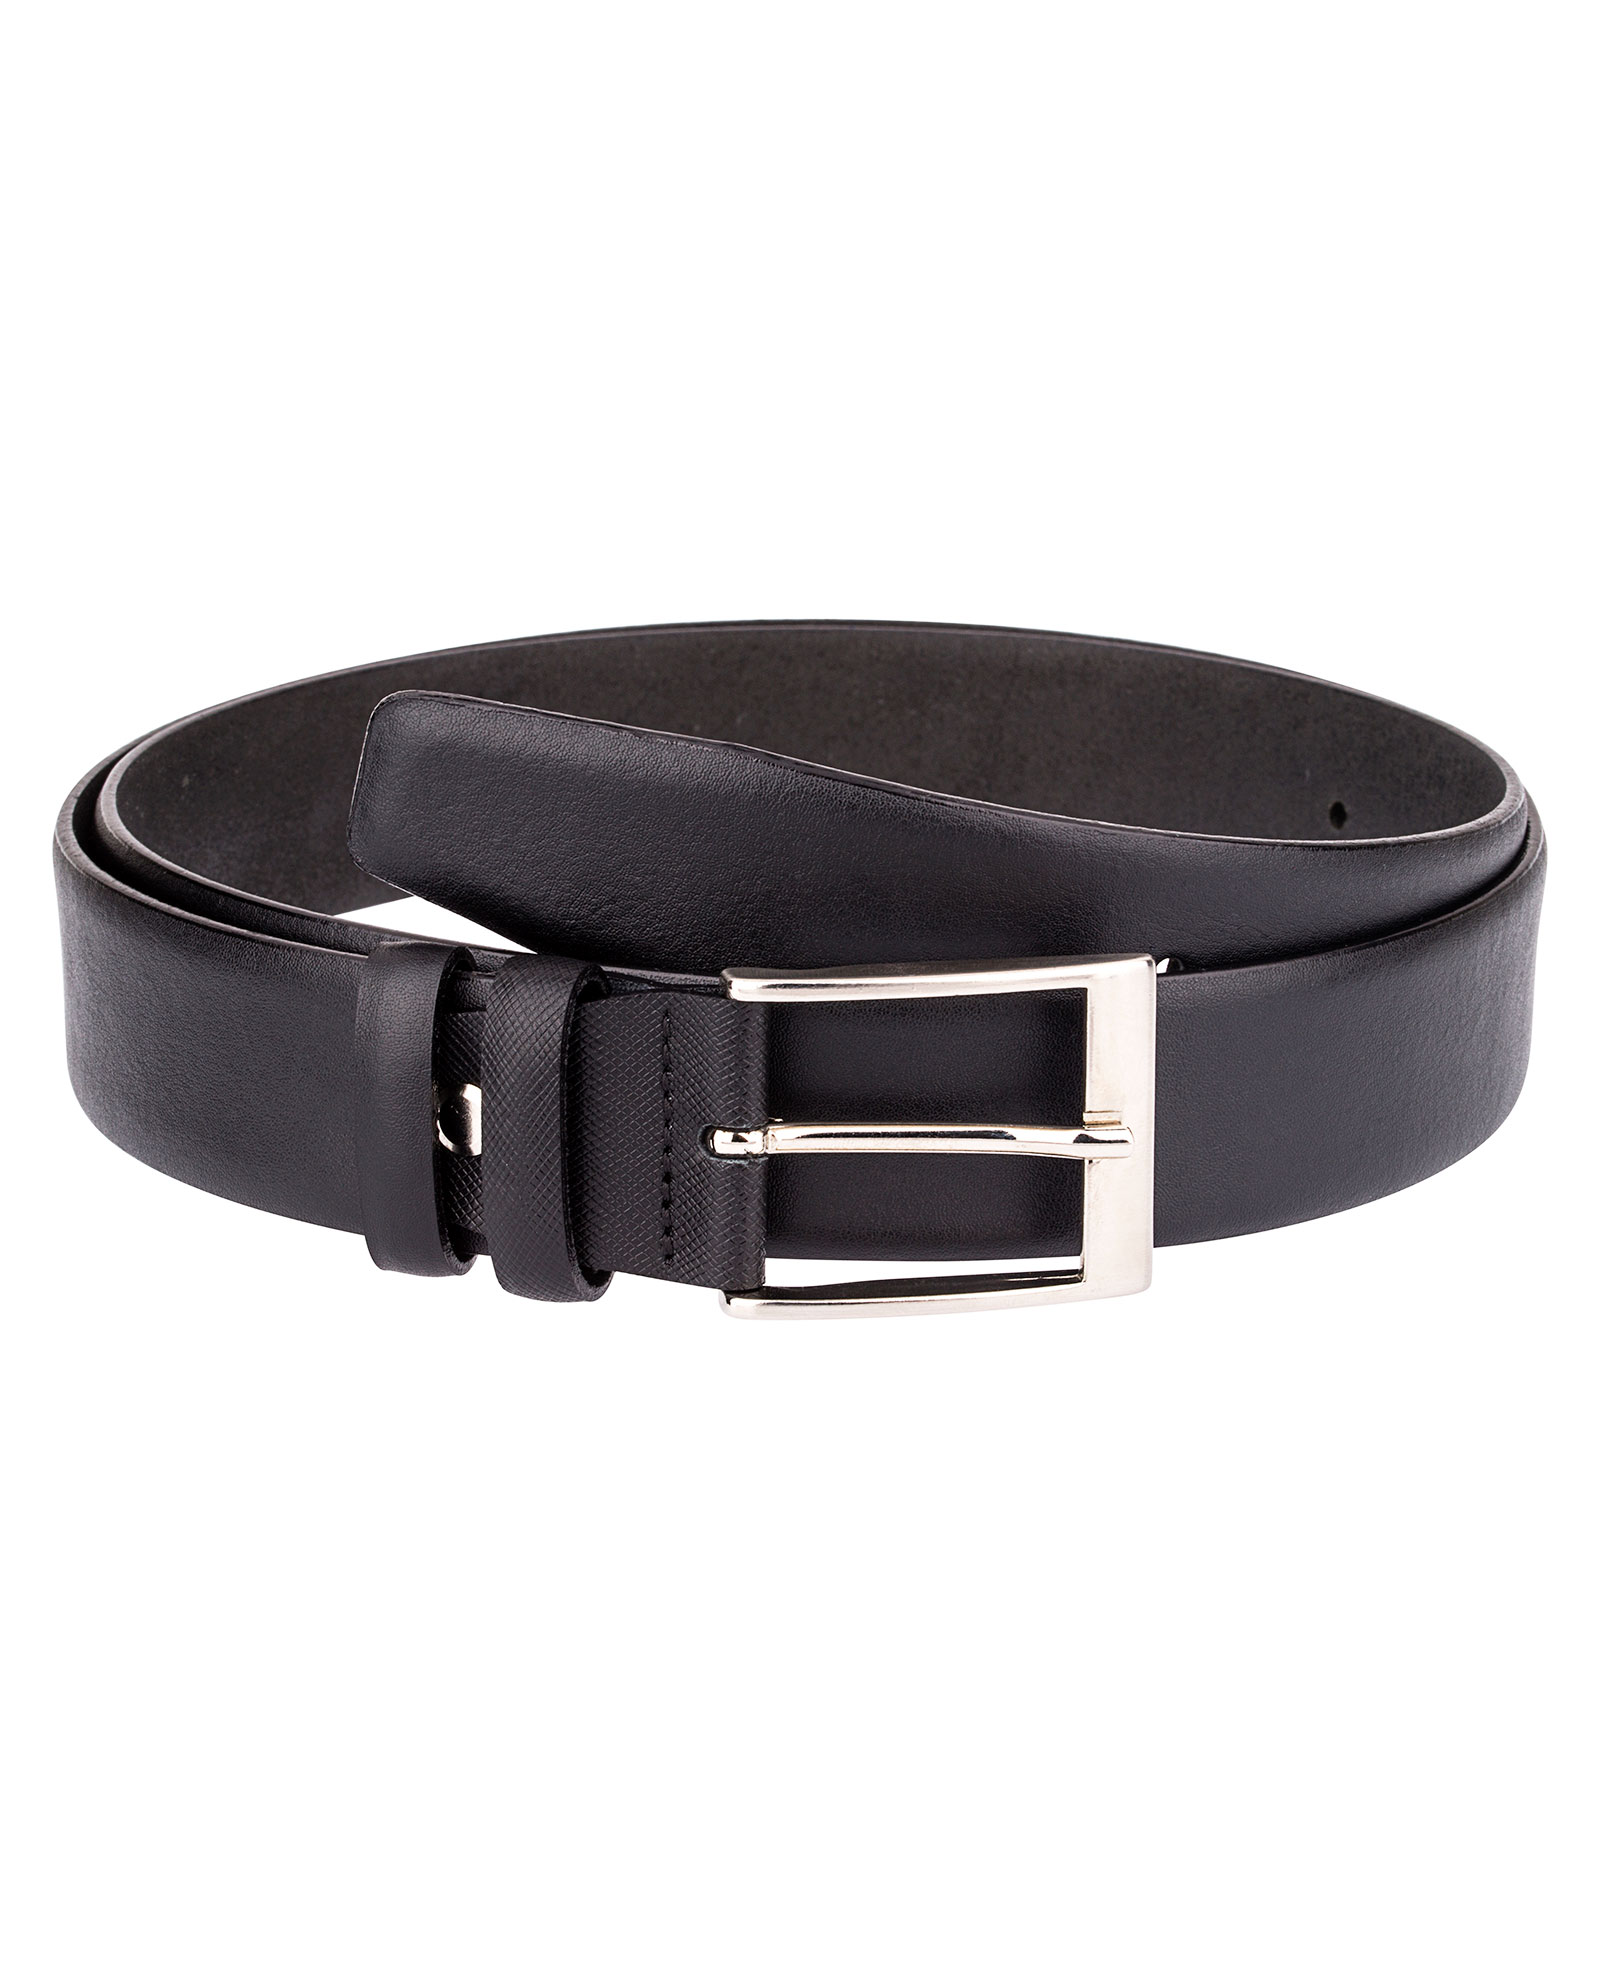 Buy Men's Smooth Leather Belt | Saffiano Buckle | Free Shipping!